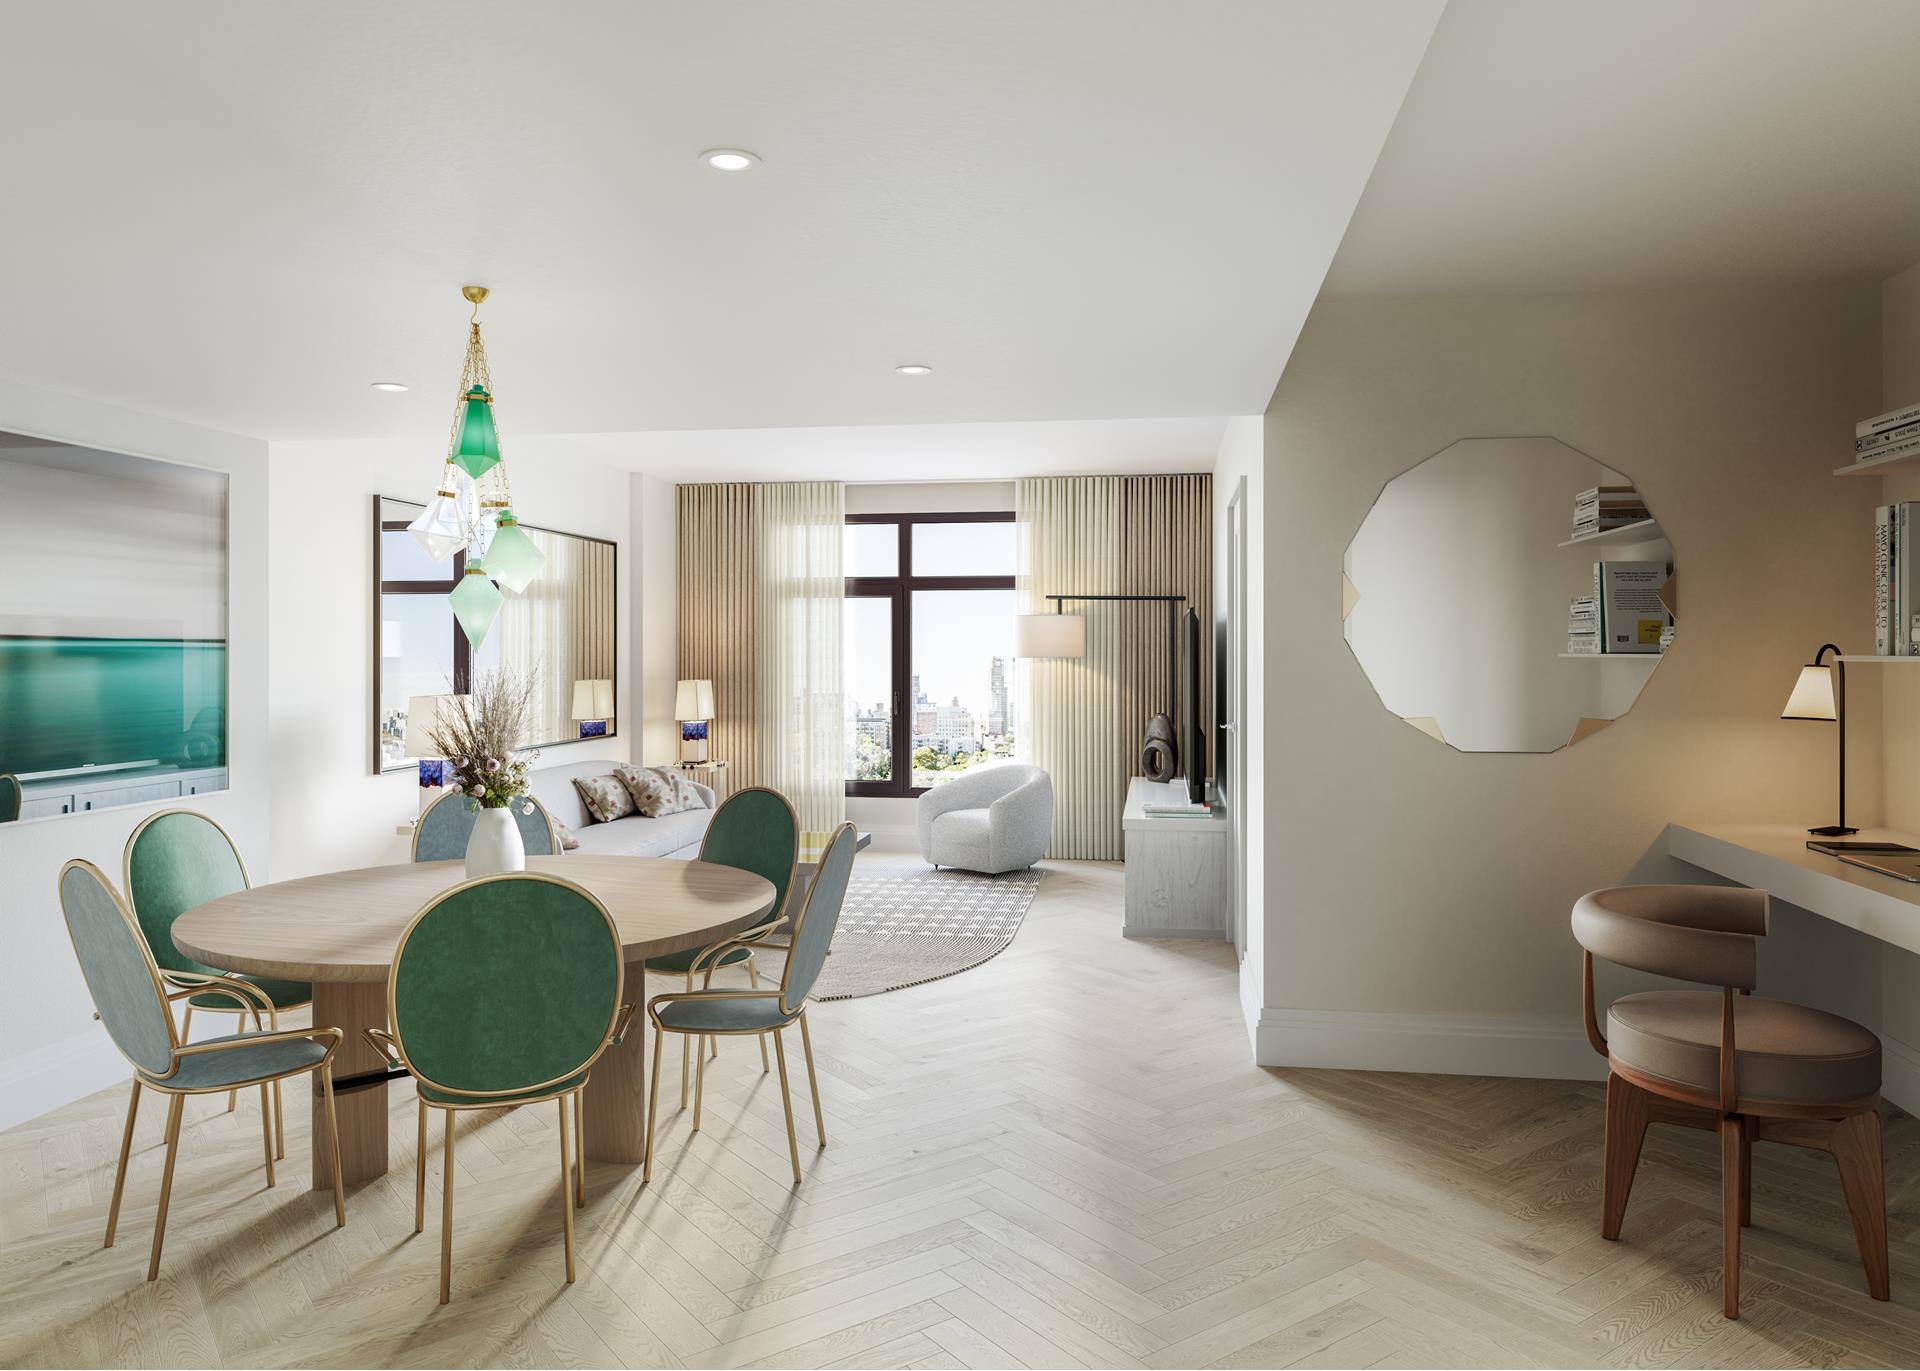 Sales Gallery Now Open By Appointment Introducing residence 5M at 300 West, a west facing one bedroom, one bathroom, offering a 220 square foot outdoor terrace and expansive living dining ...